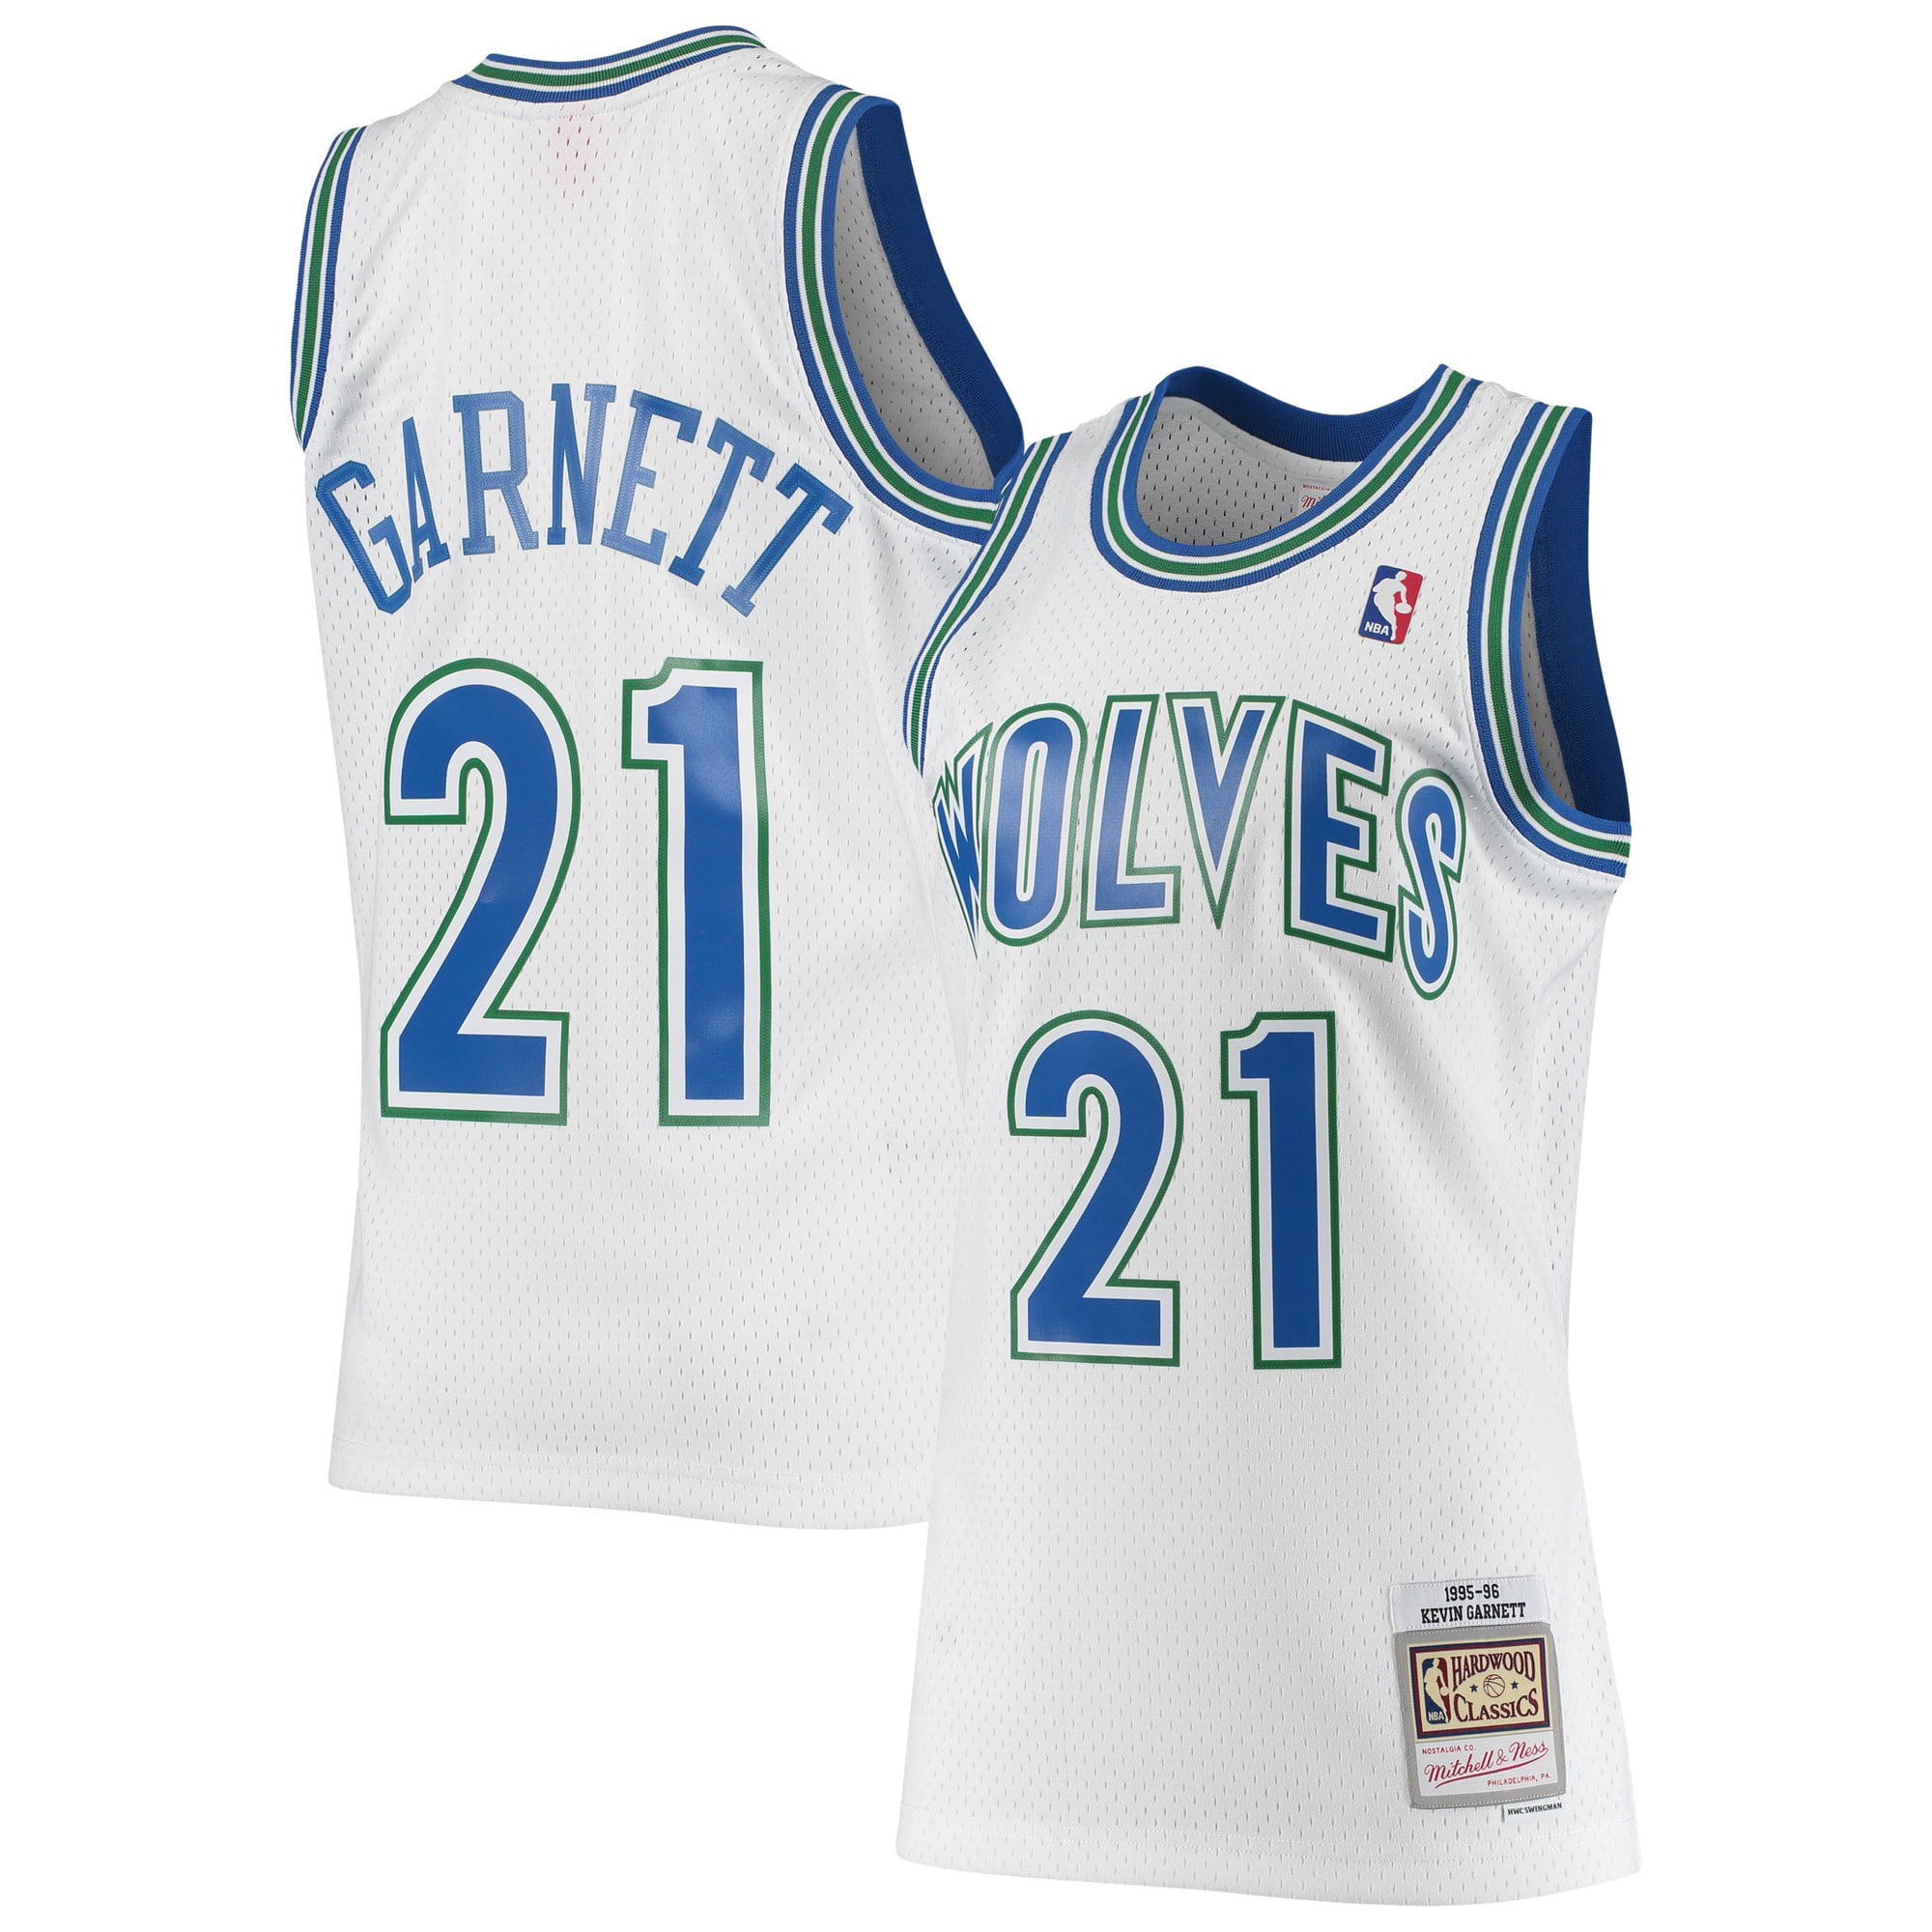 Fanatics Authentic Kevin Garnett Minnesota Timberwolves Autographed Black Mitchell and Ness Authentic Jersey